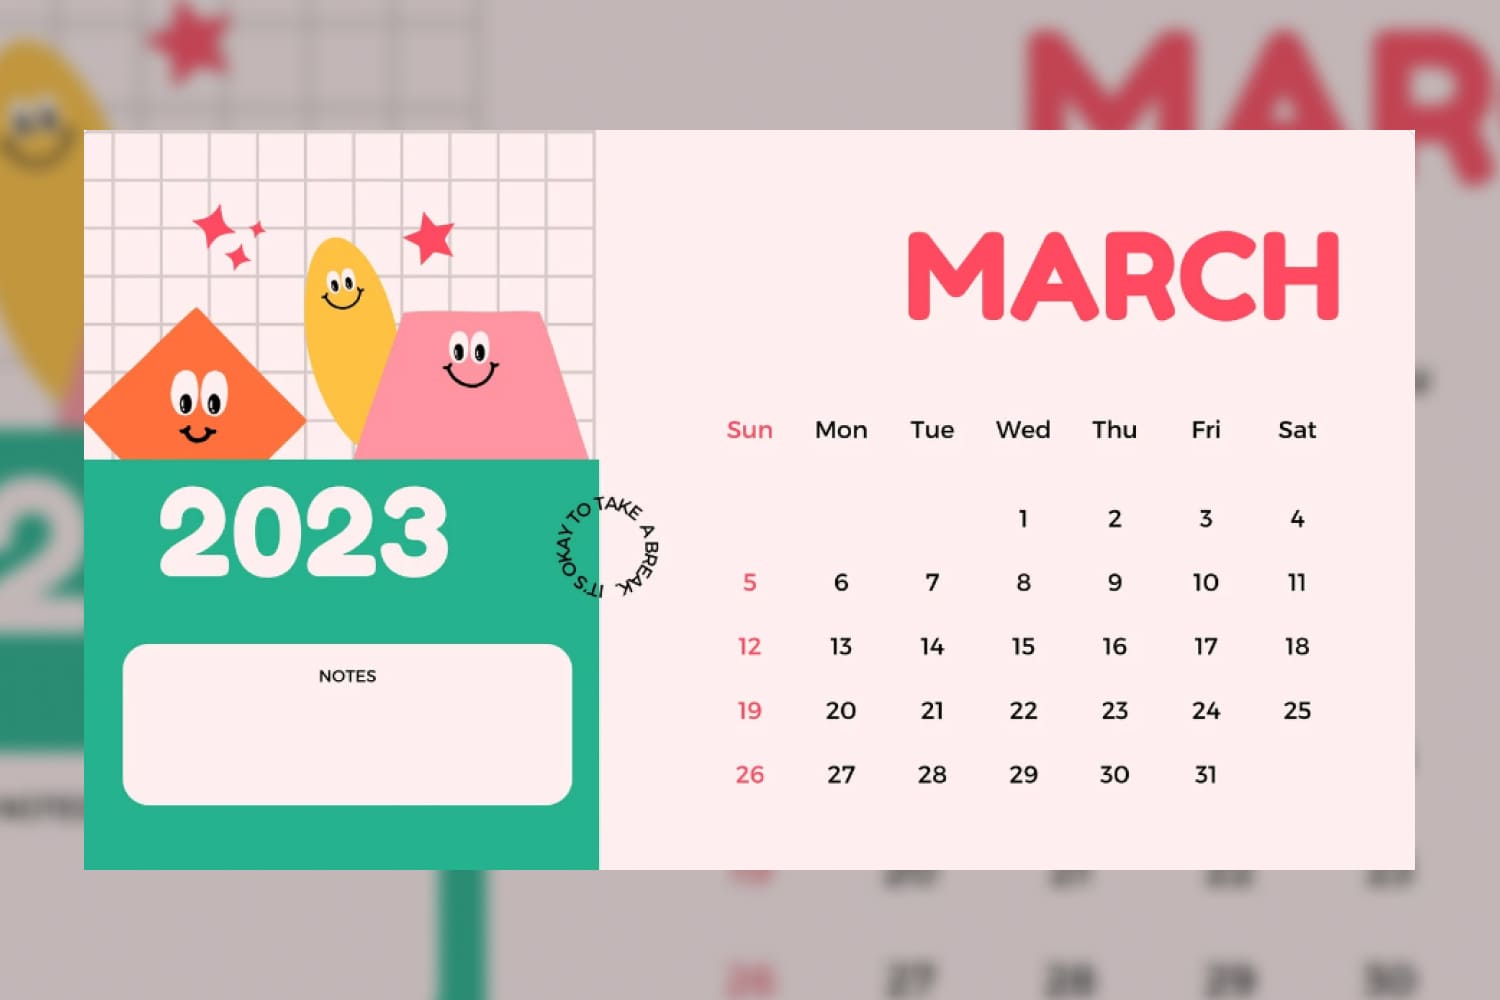 March calendar with fun design and a colorful illustration in pink and green tones.